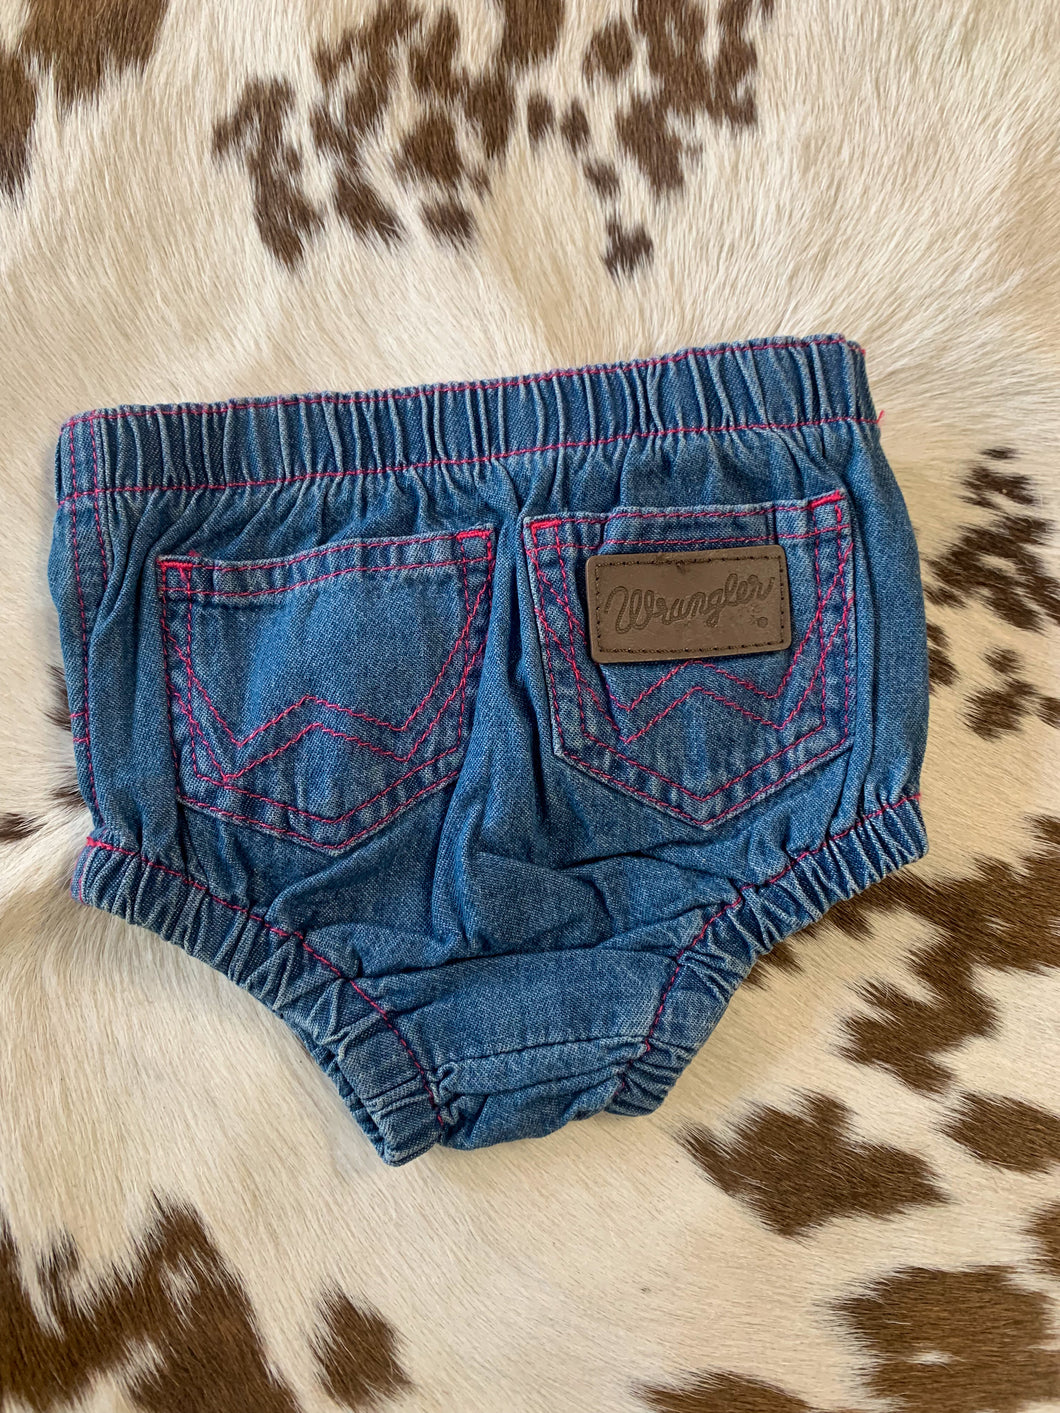 Wrangler Bummies with Pink Embroidery